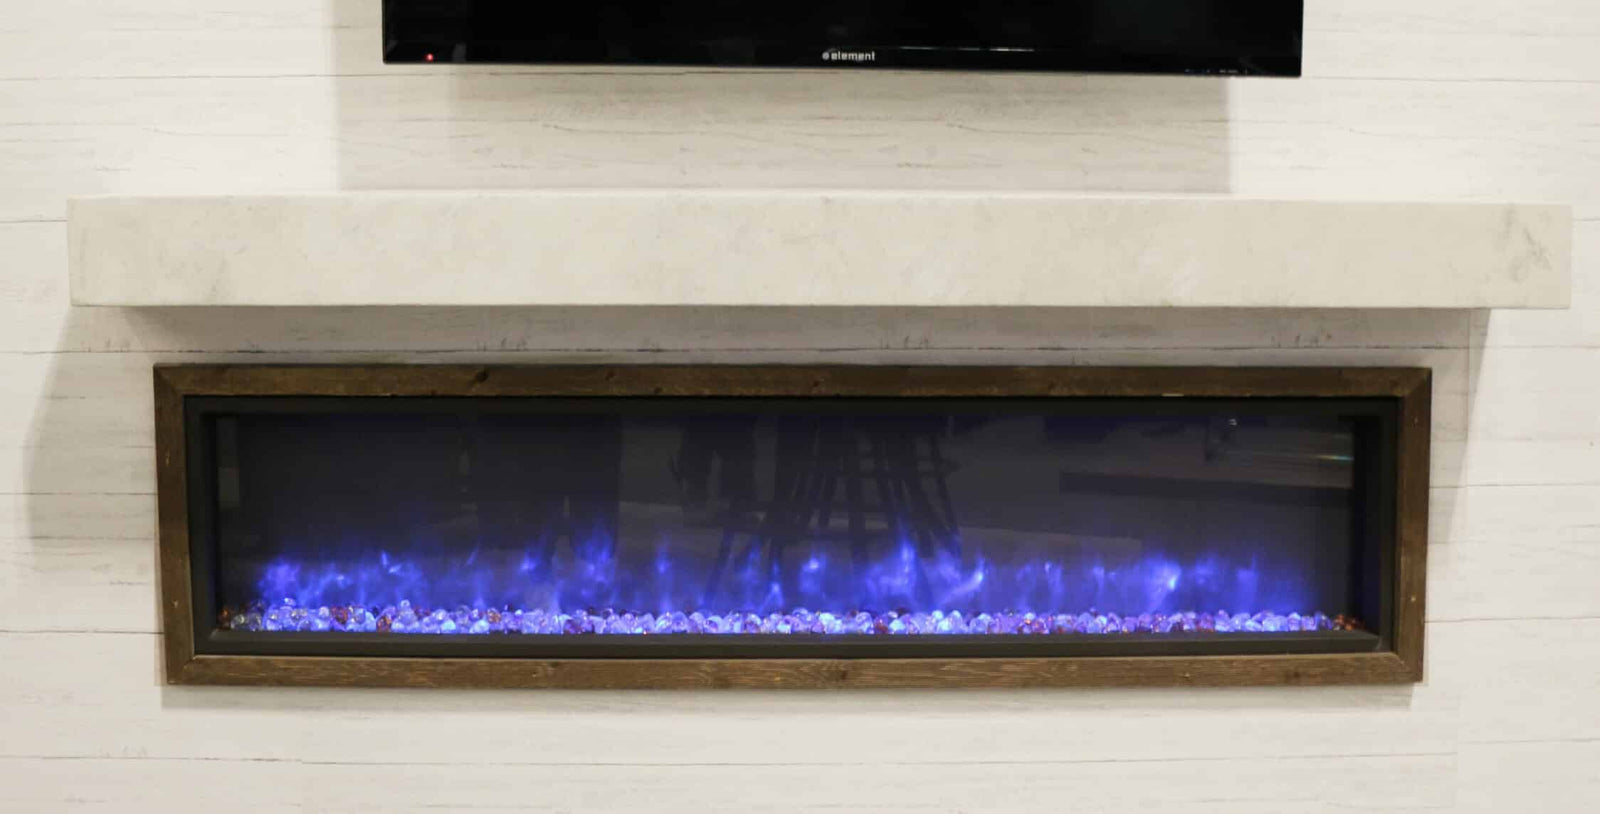 New Product: White Onyx Non-Combustible Supercast Mantel